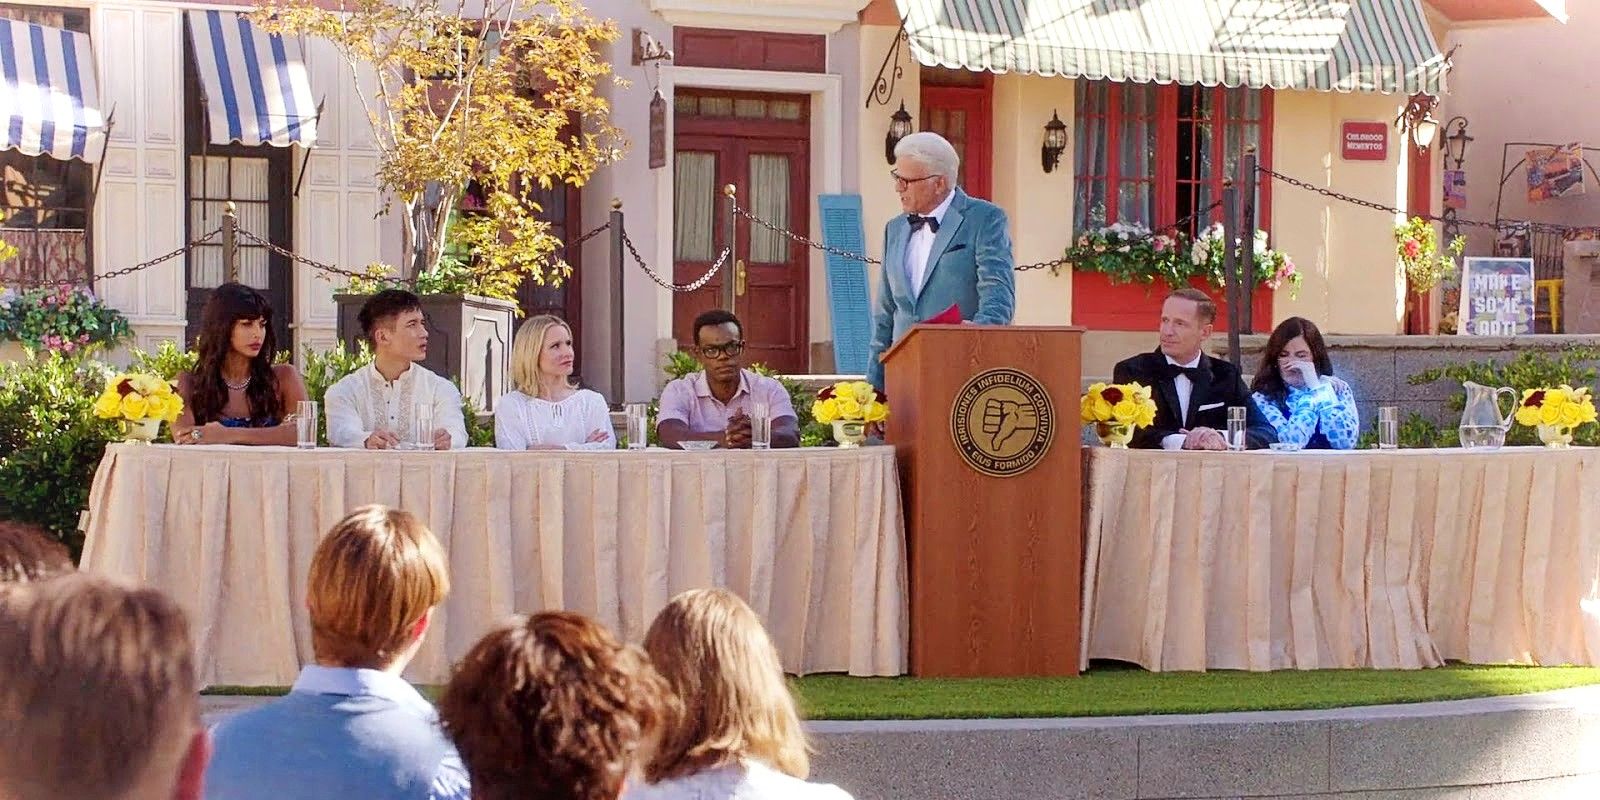 Michael's speech in Leap to Faith in The Good Place